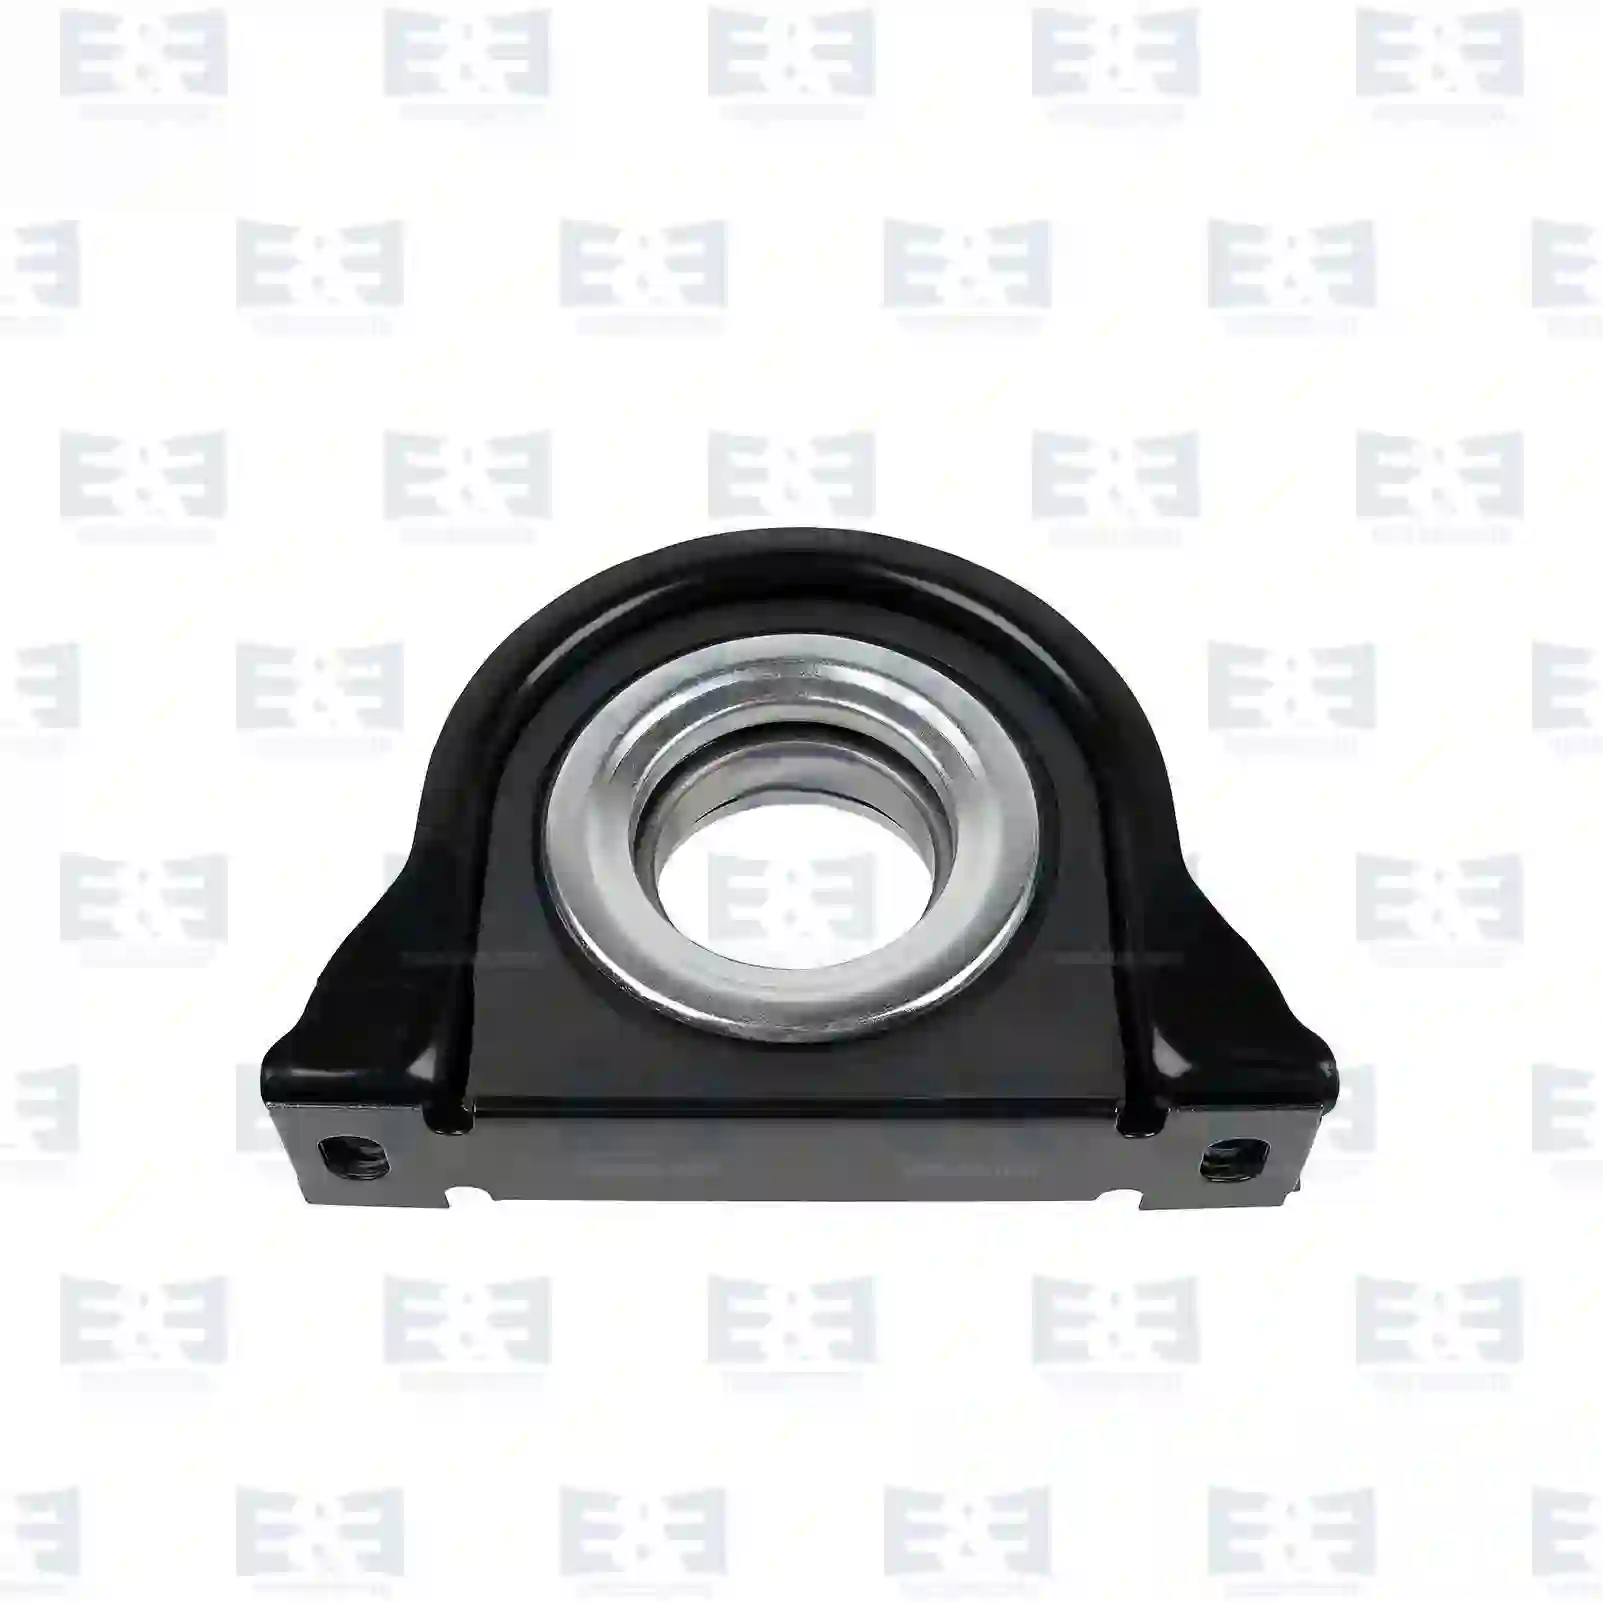 Support Bearing Center bearing, EE No 2E2276828 ,  oem no:1288231, 1364376, 1425157, 1640922, 1691743, 1740904, ZG02491-0008 E&E Truck Spare Parts | Truck Spare Parts, Auotomotive Spare Parts